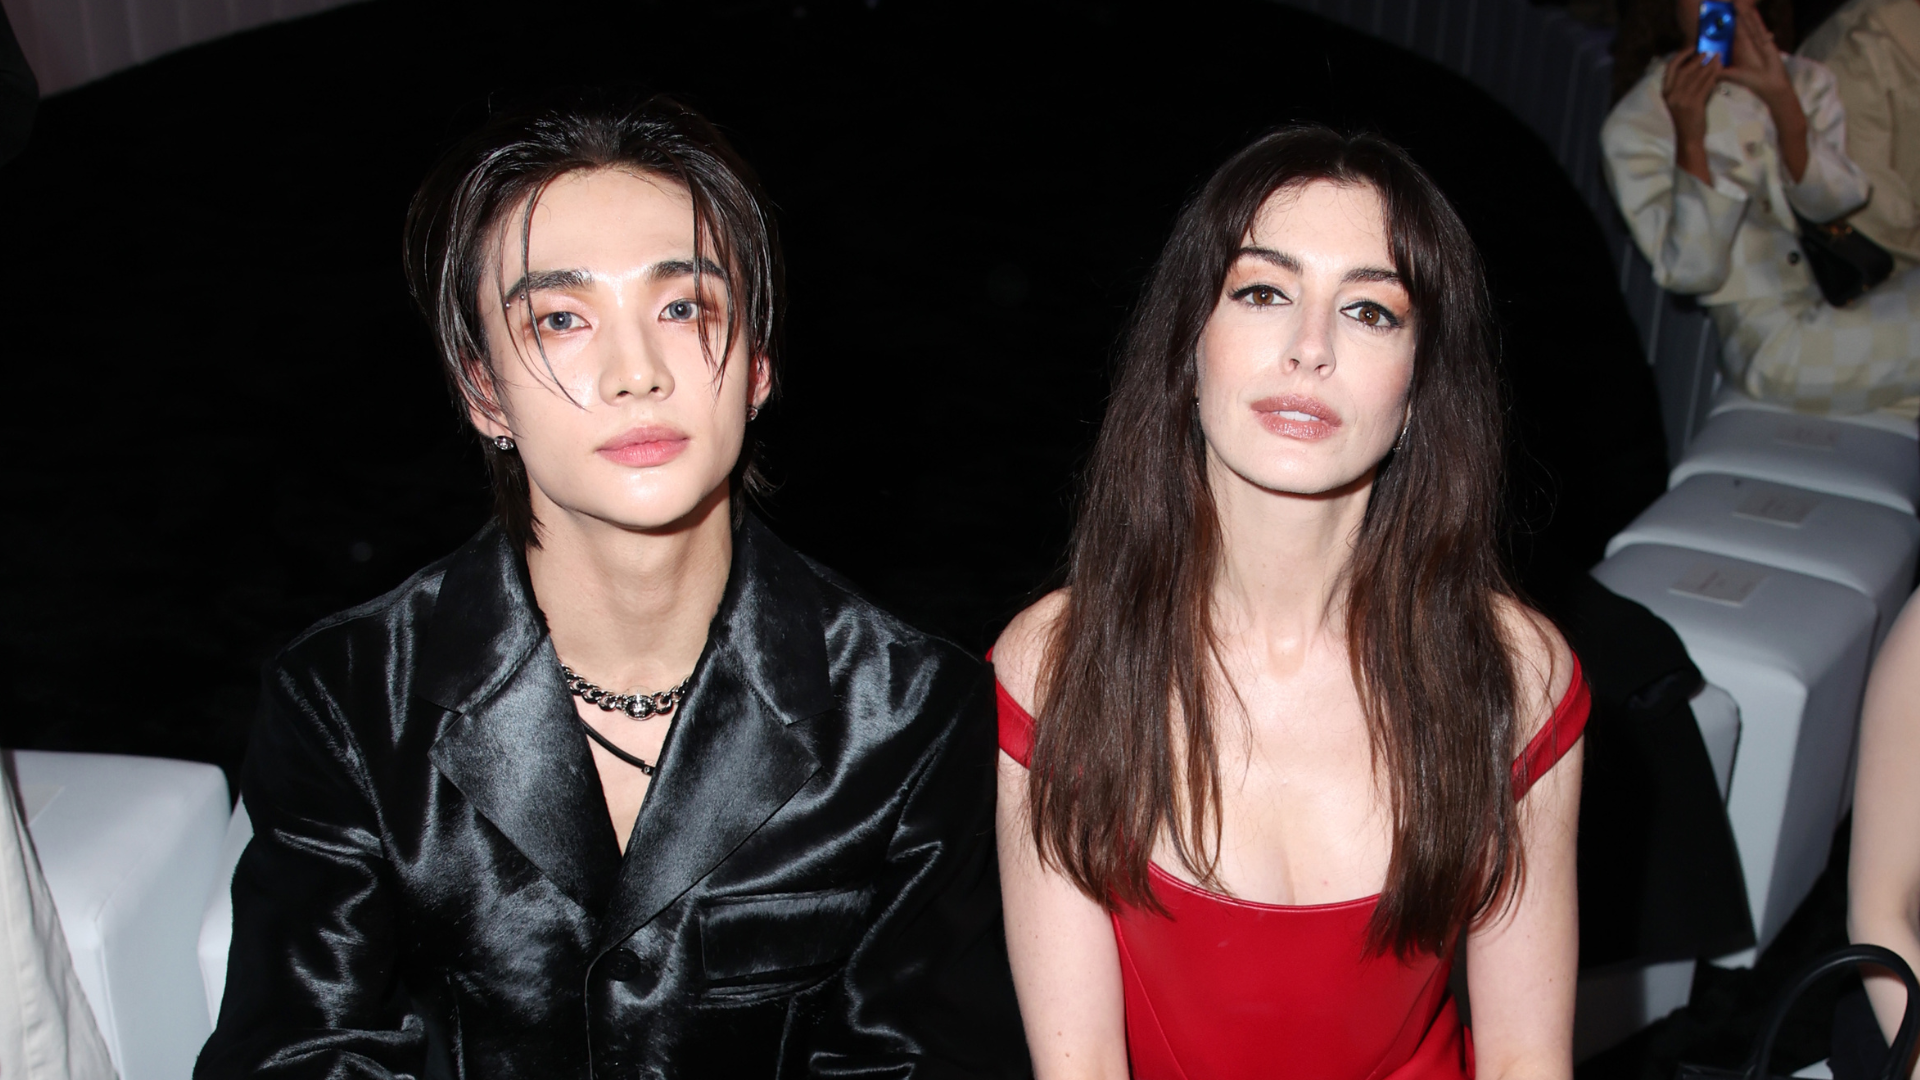 Hyunjin and Anne Hathaway sit side by side. He is in a black leather jacket and she is in a red dress.